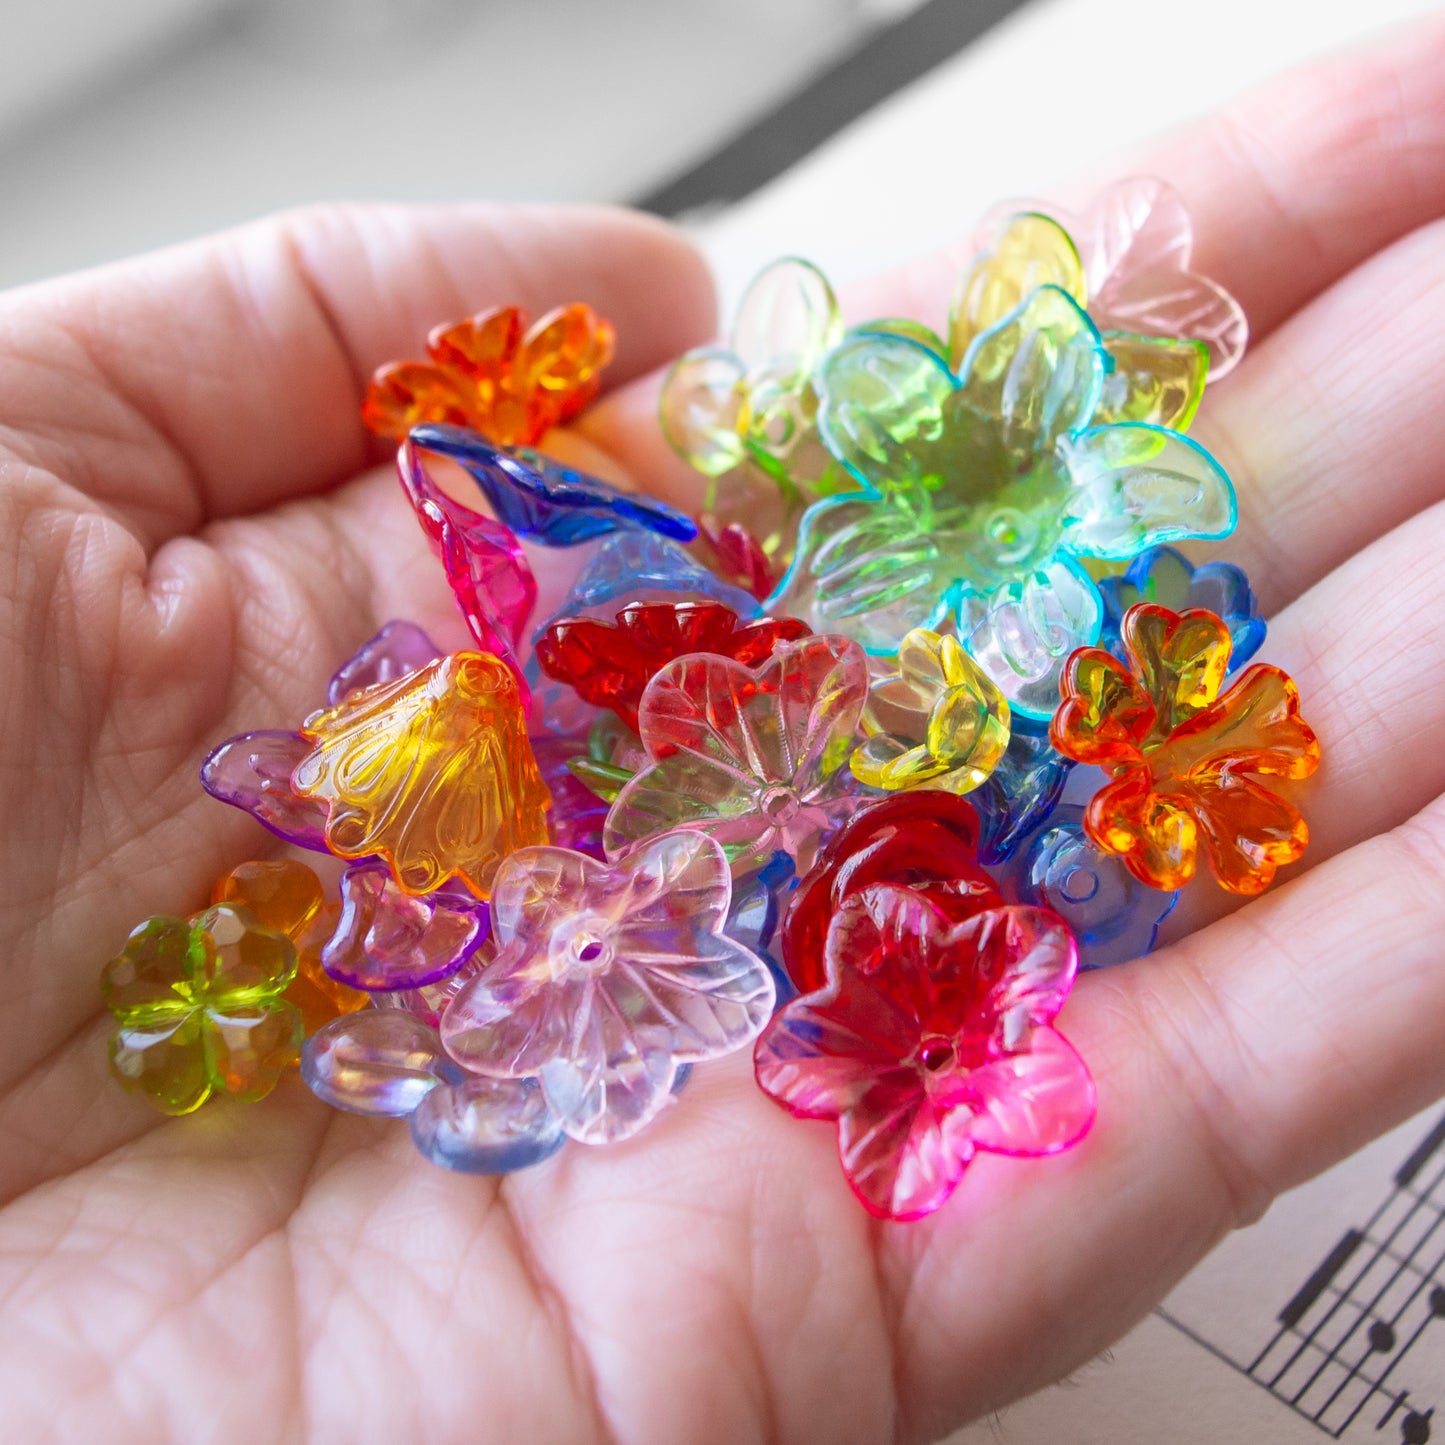 Transparent Acrylic Flower Beads in Assorted Styles and Colors